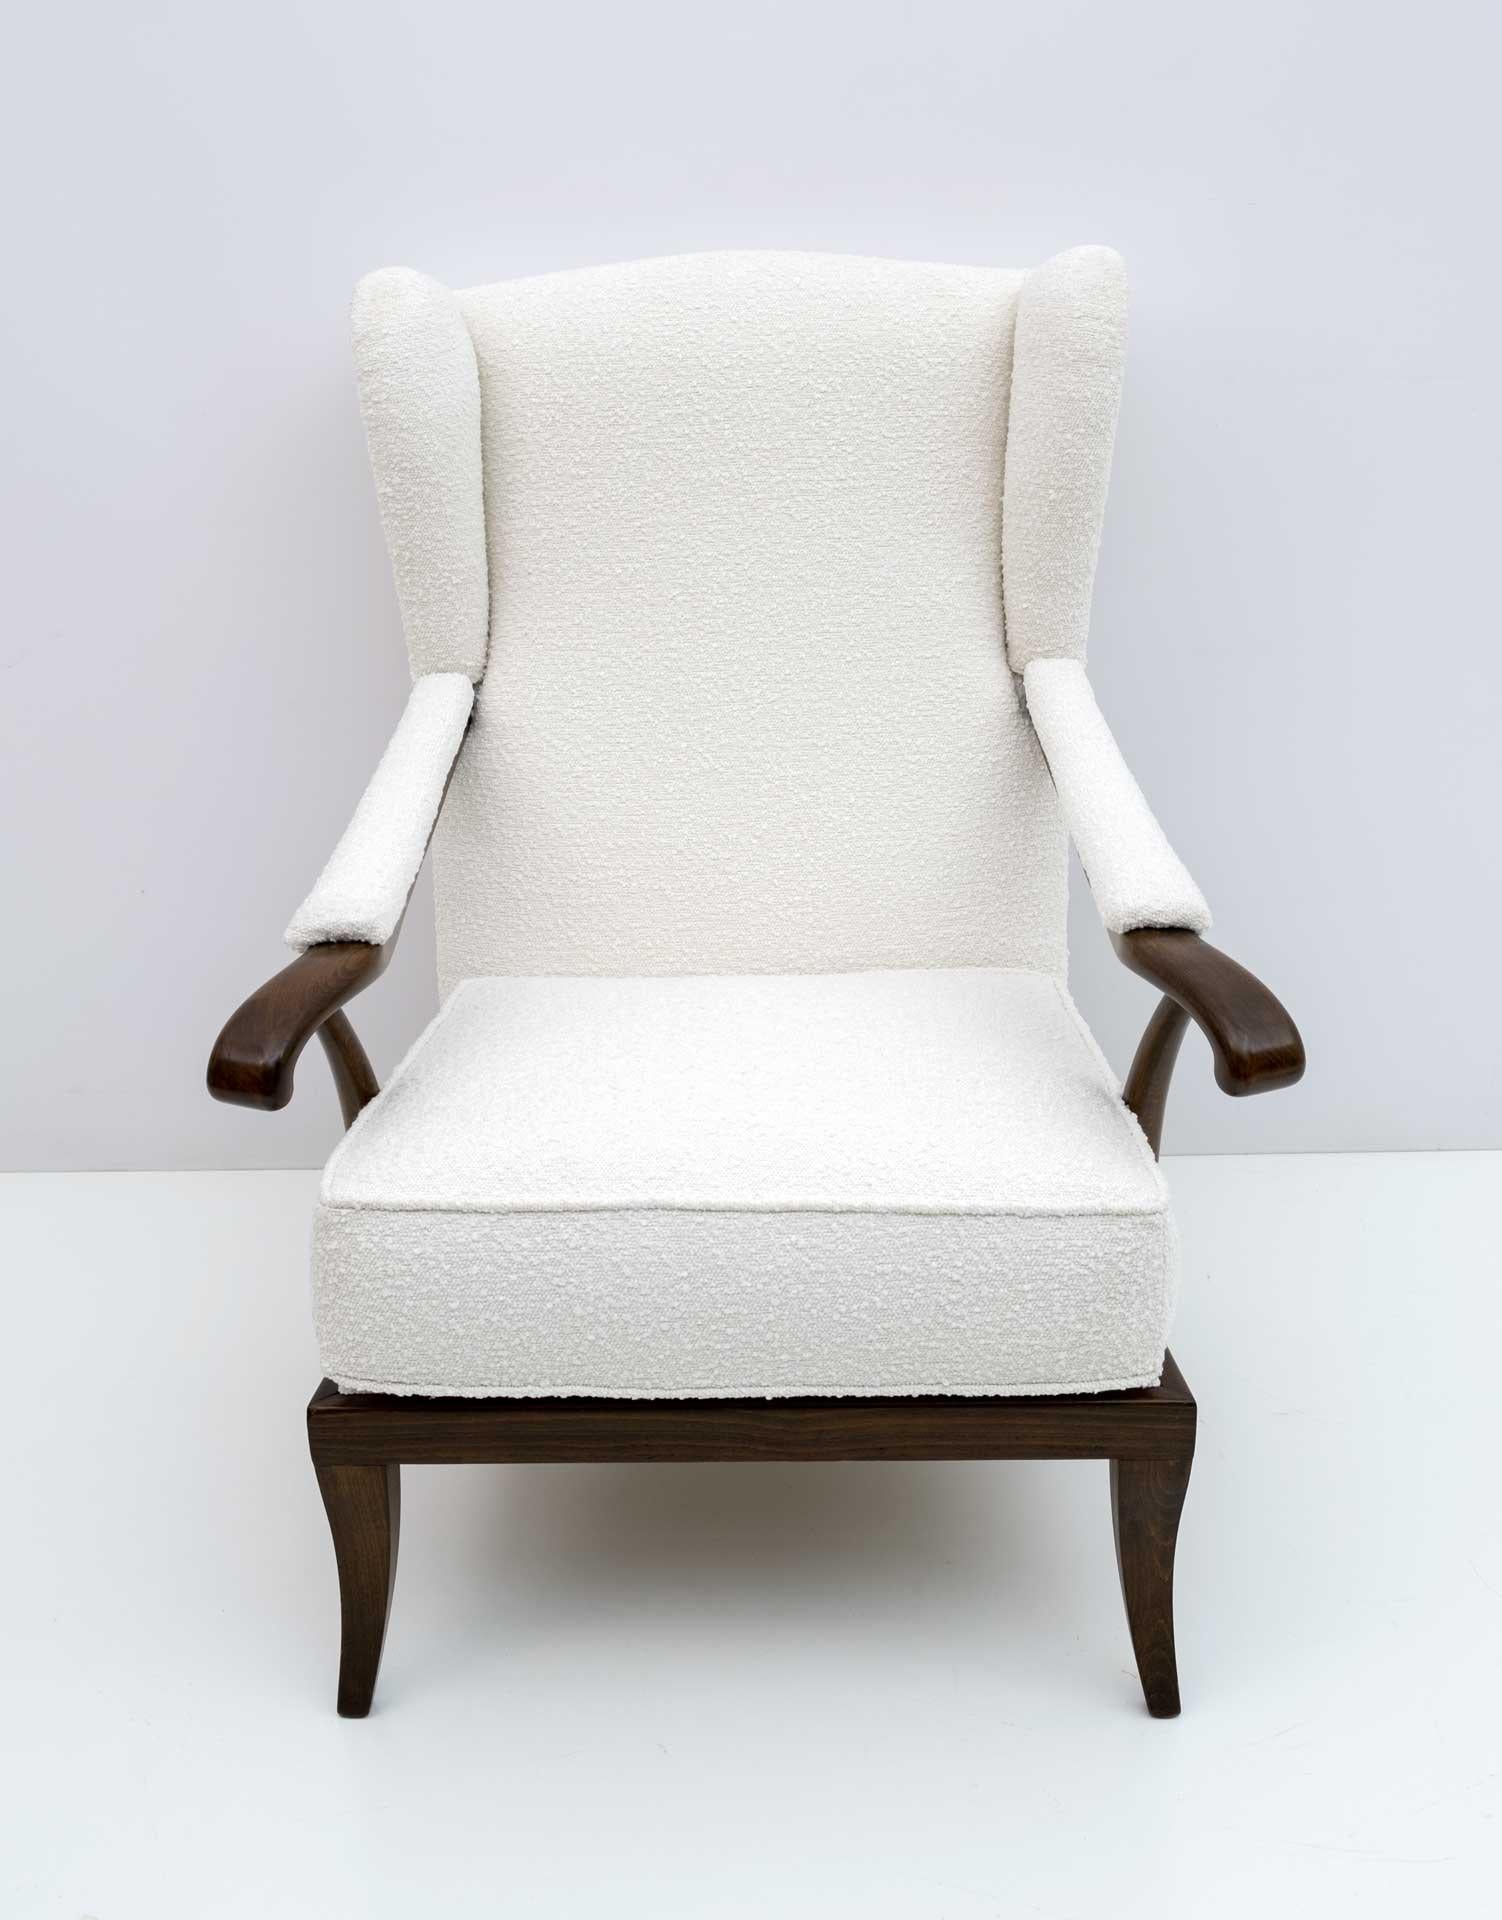 Italian mid-century armchair in light ivory Boucle fabric and walnut wood. Designed by Paolo Buffa in the 1950s. Perfect condition. Fabric and padding redone. Total restoration.